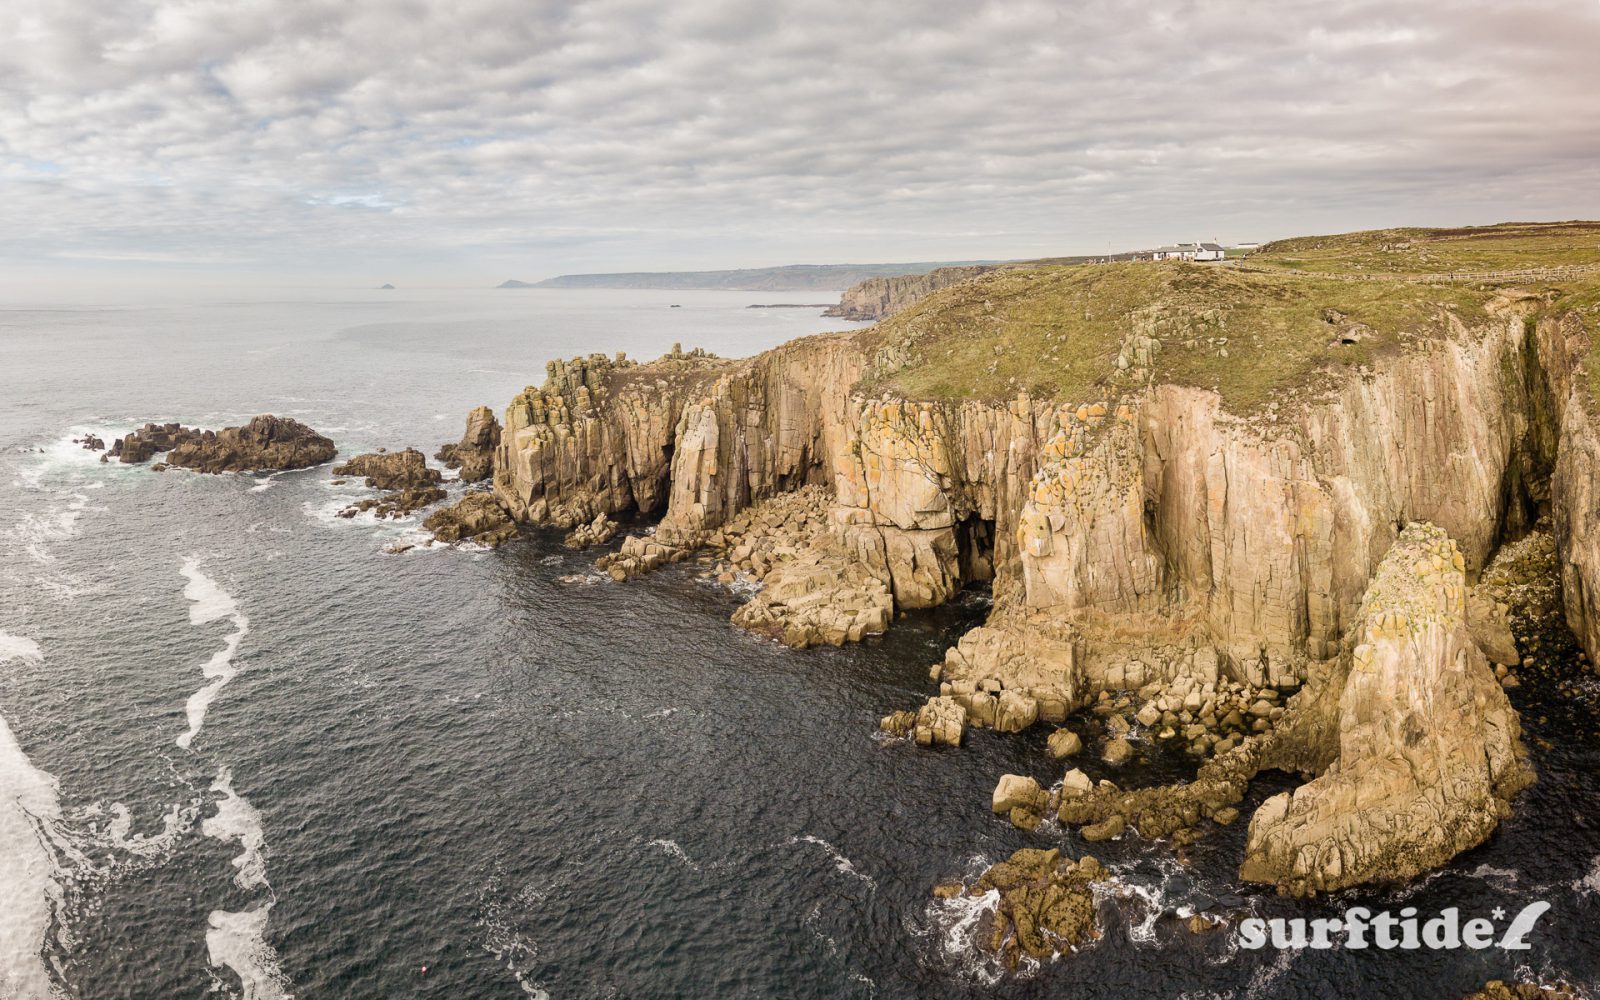 Aerial photo of the sea and rocky coastline at Land's End, Cornwall, England